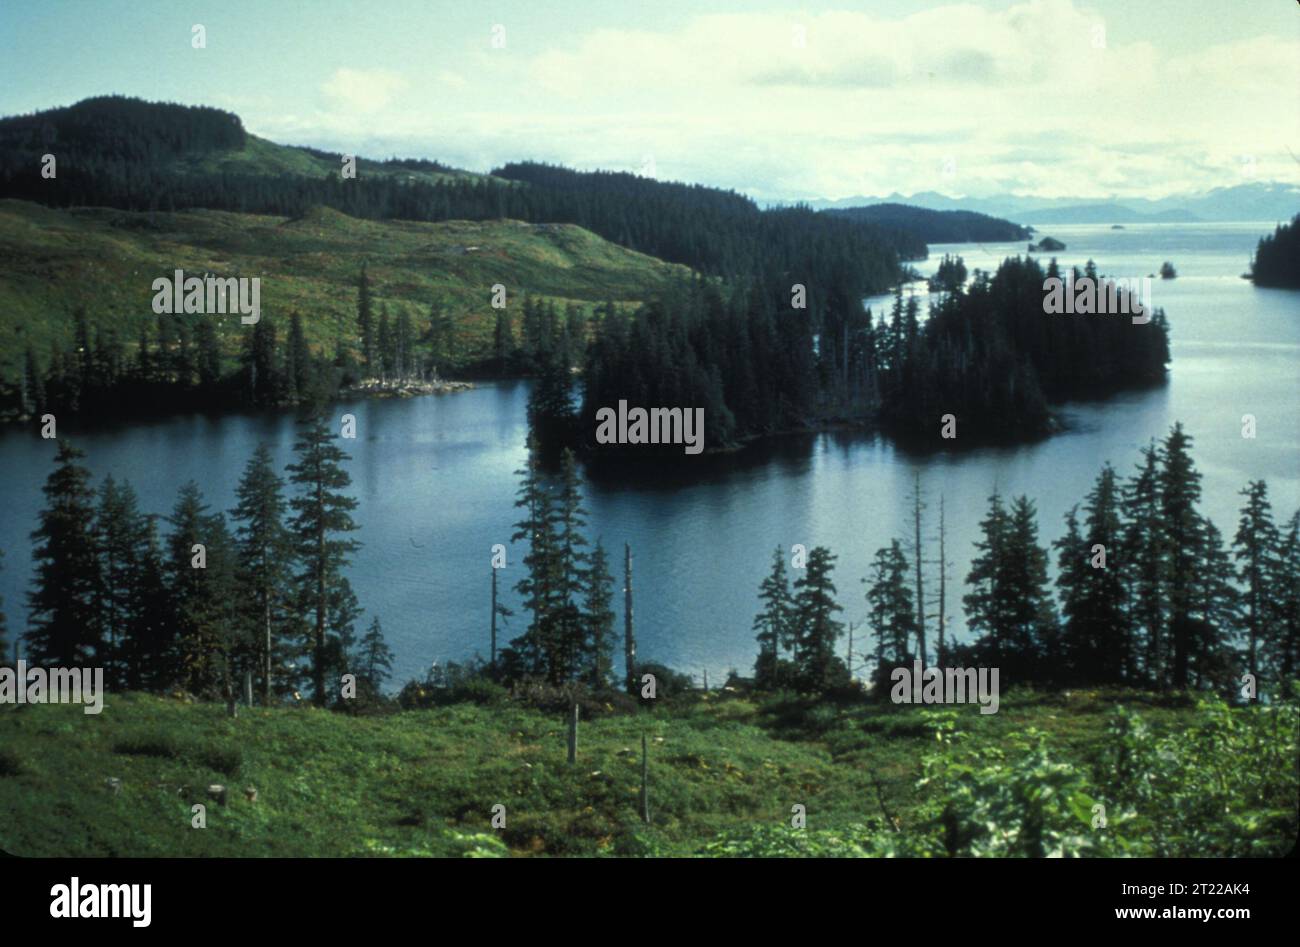 Scenic view of a the Kayakol Bay surrounded by evergreens. Subjects: Scenics; Trees. Location: Alaska.  . 1998 - 2011. Stock Photo